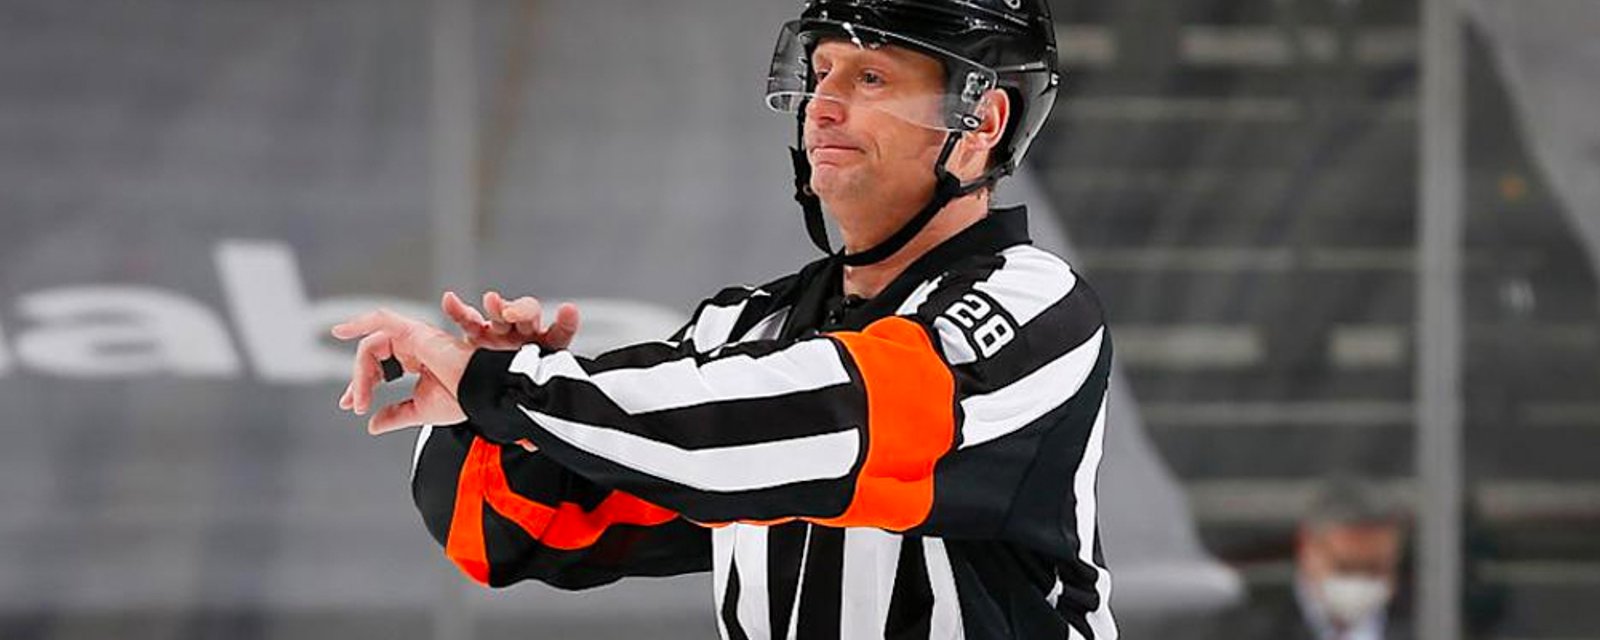 NHL names referees for Game 6 and Habs fans are not happy